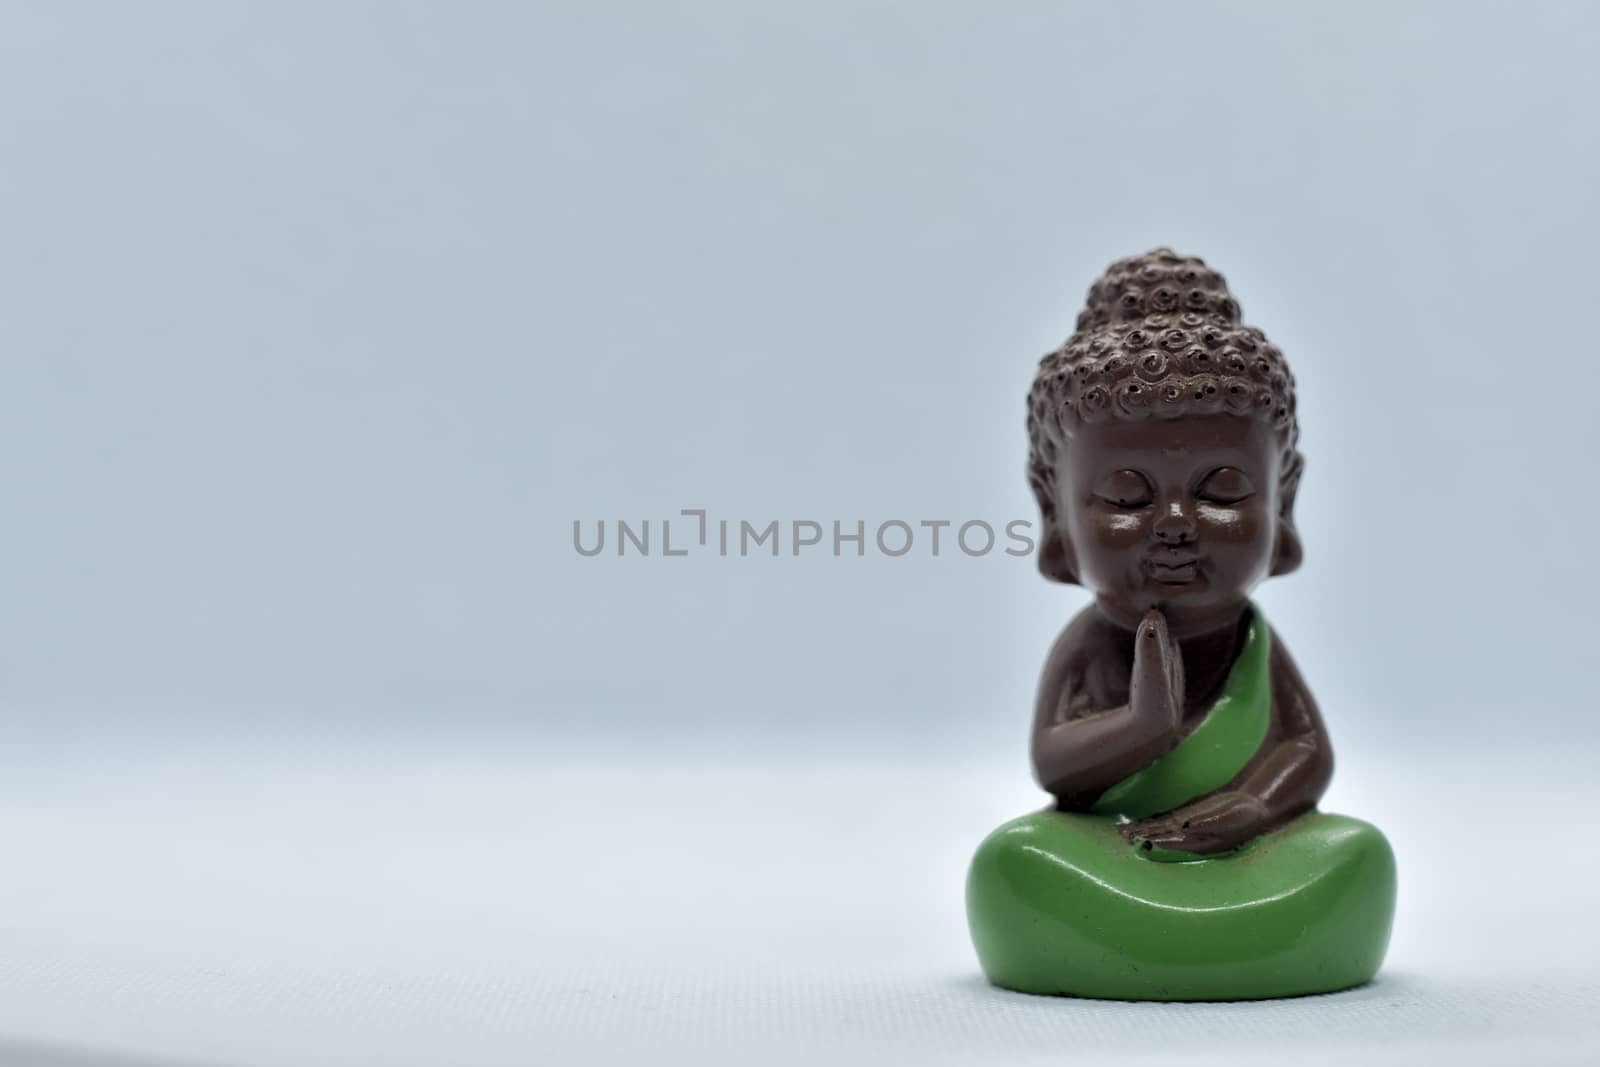 Buddha statues are taken as objects of great significance in Buddhism and followers of the religion. This ceramic miniature gives a fresh look to your set up.